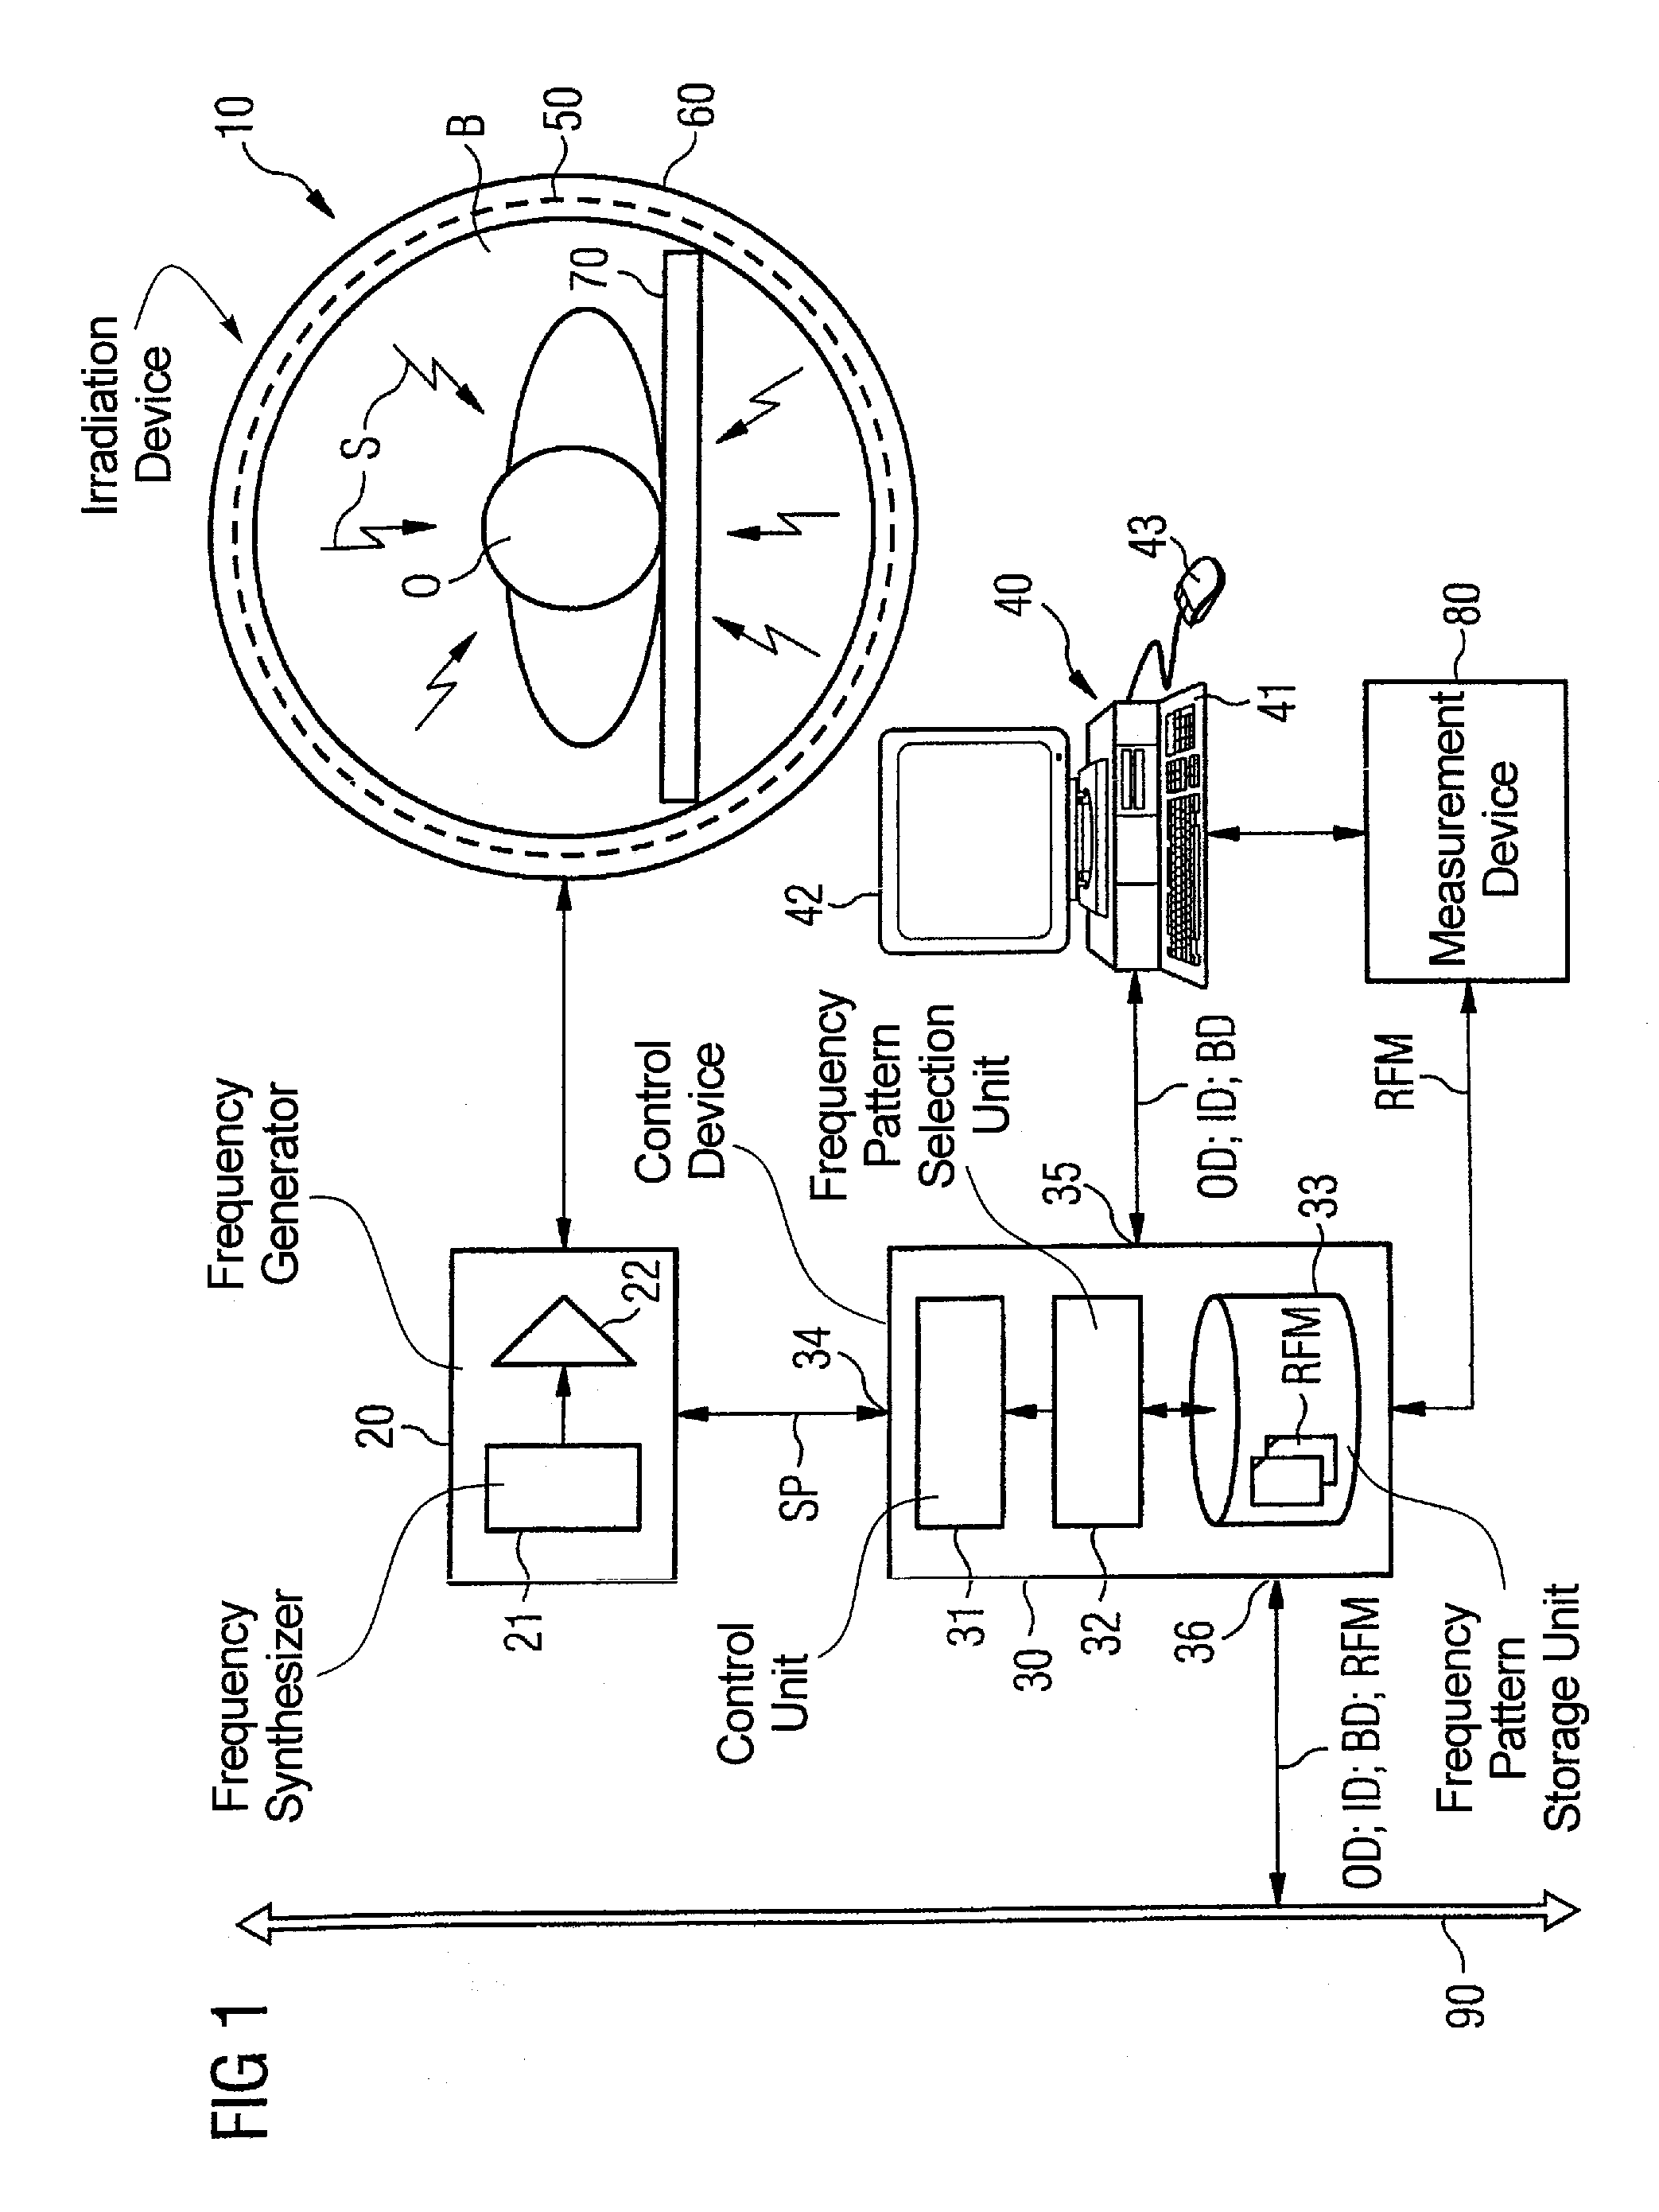 Irradiation device for influencing a biological structure in a subject with electromagnetic radiation